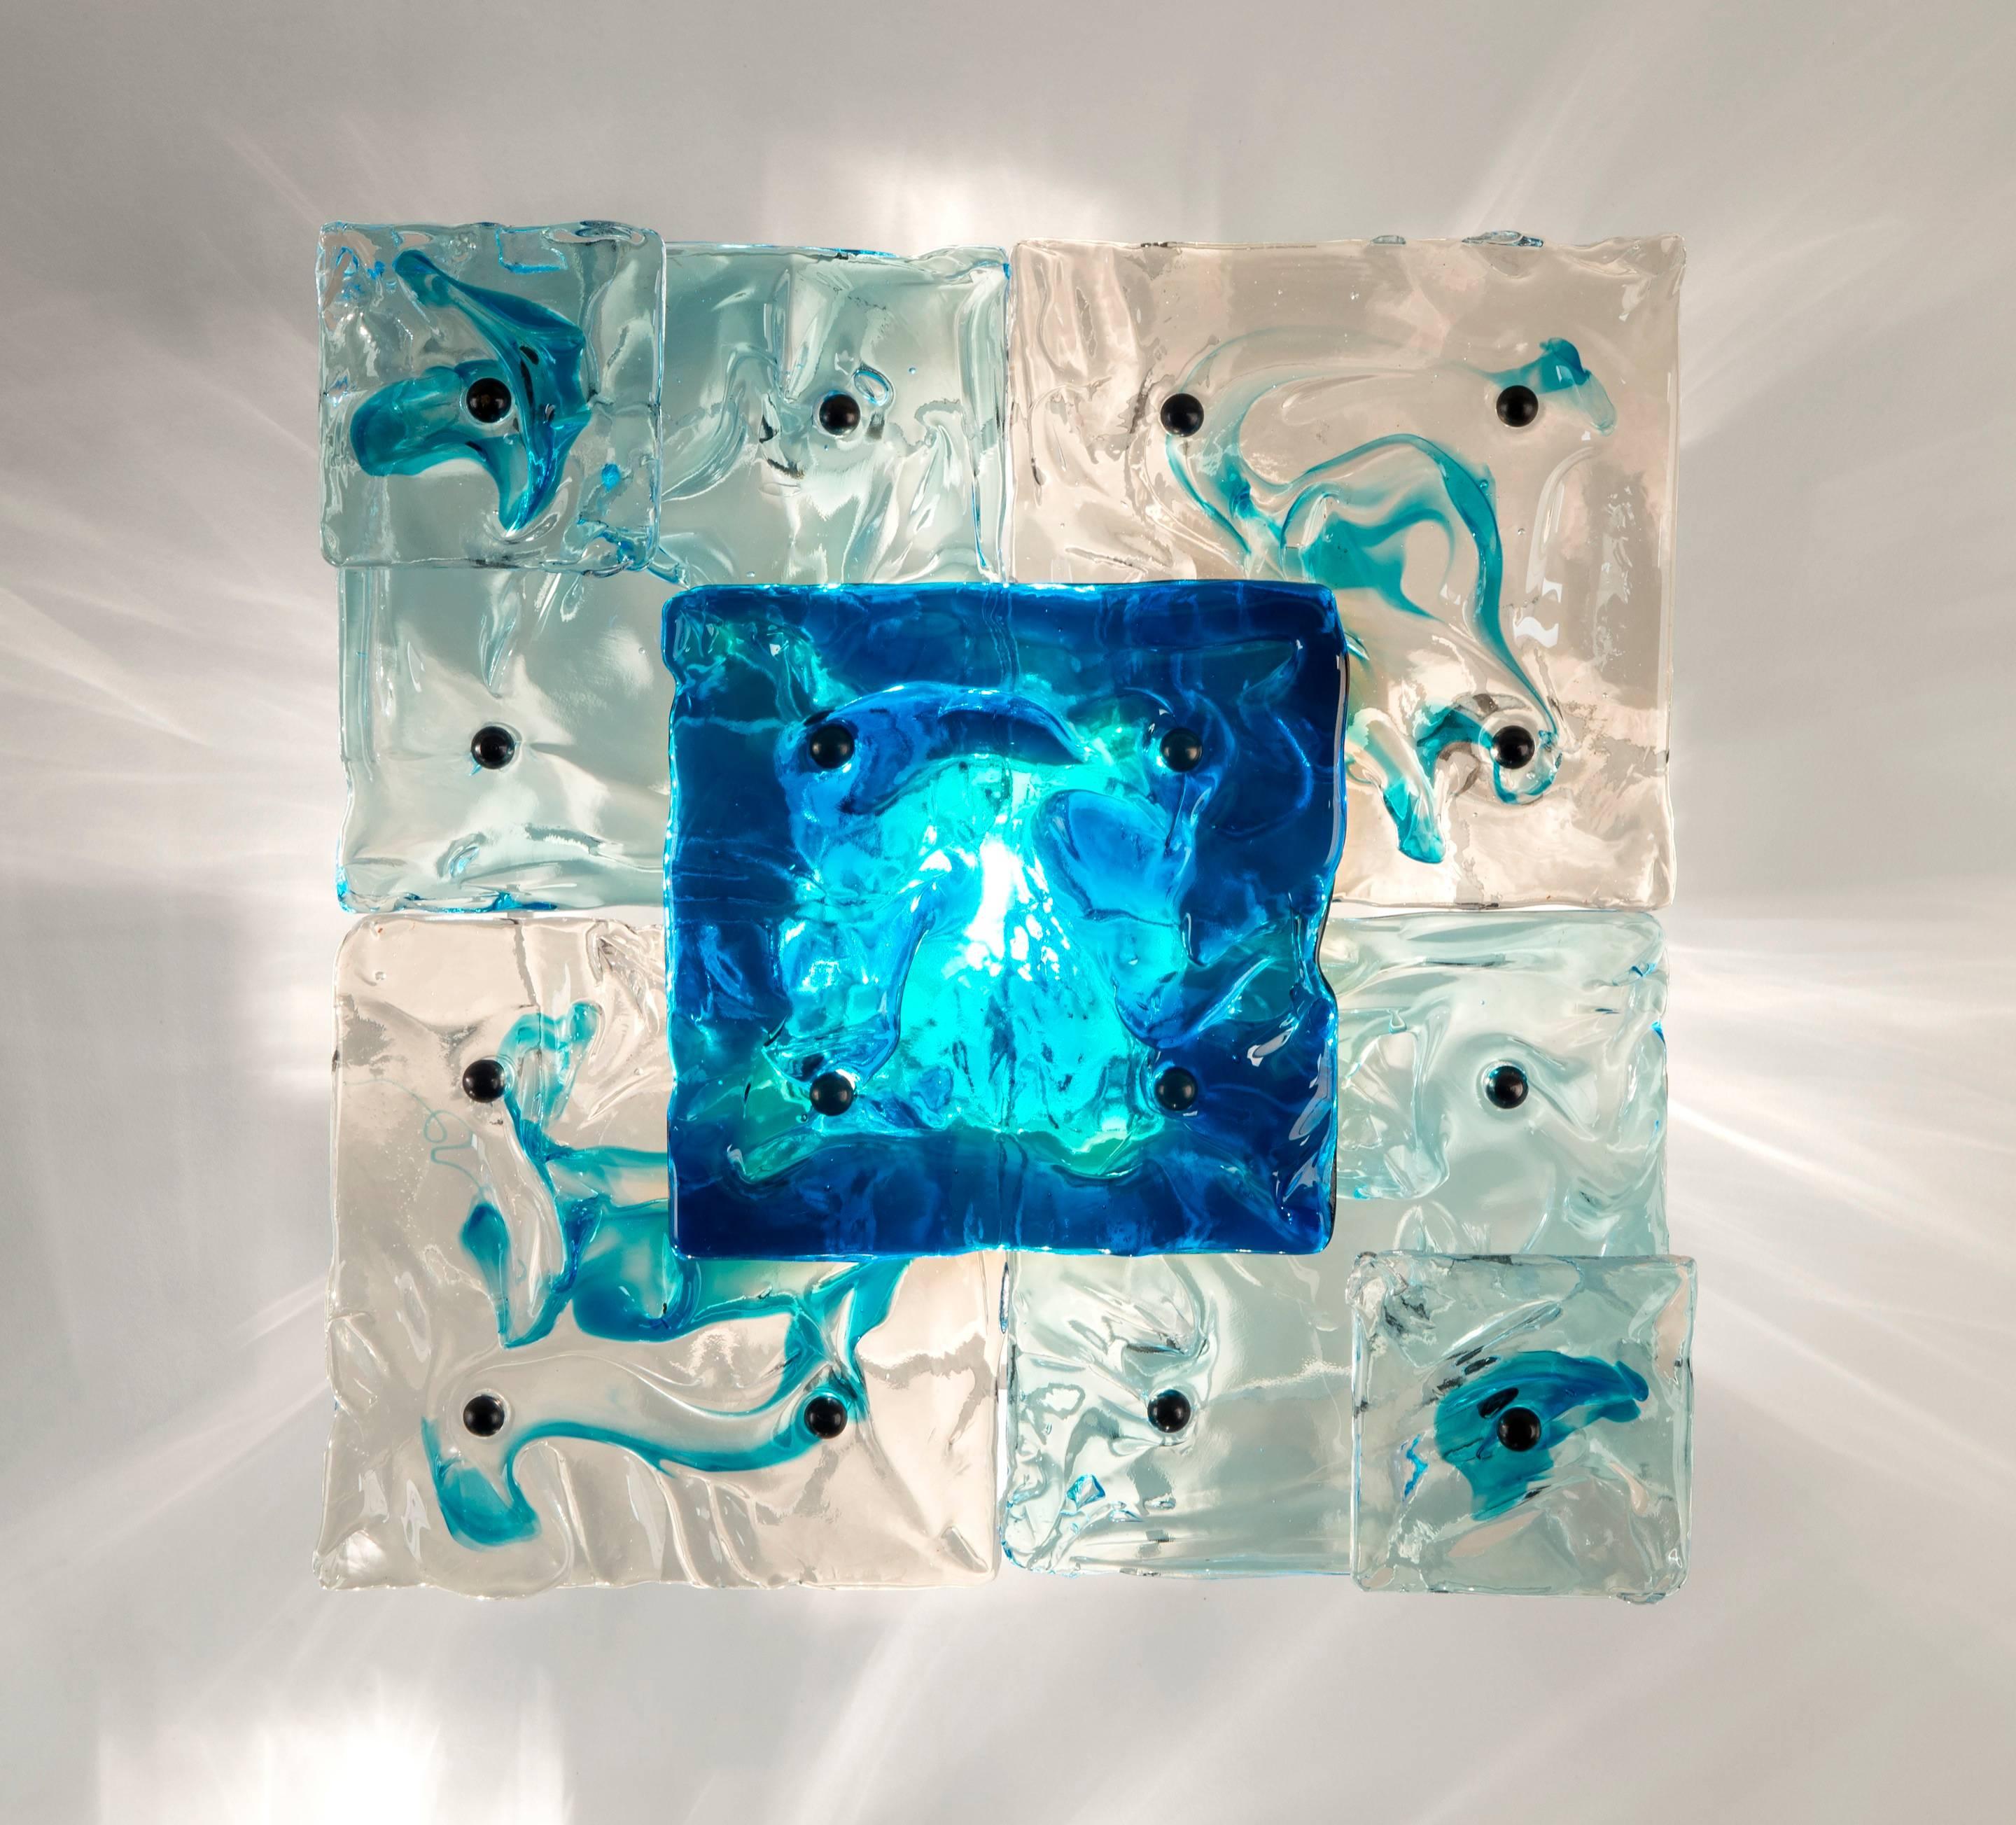 Each sconce composed of layered panels of uniquely-textured colorless and azure glass. Each stamped: Venini Murano.

These scones can also be interconnected and reconfigured to form a larger wall sculpture, as is illustrated by Franco Deboni,